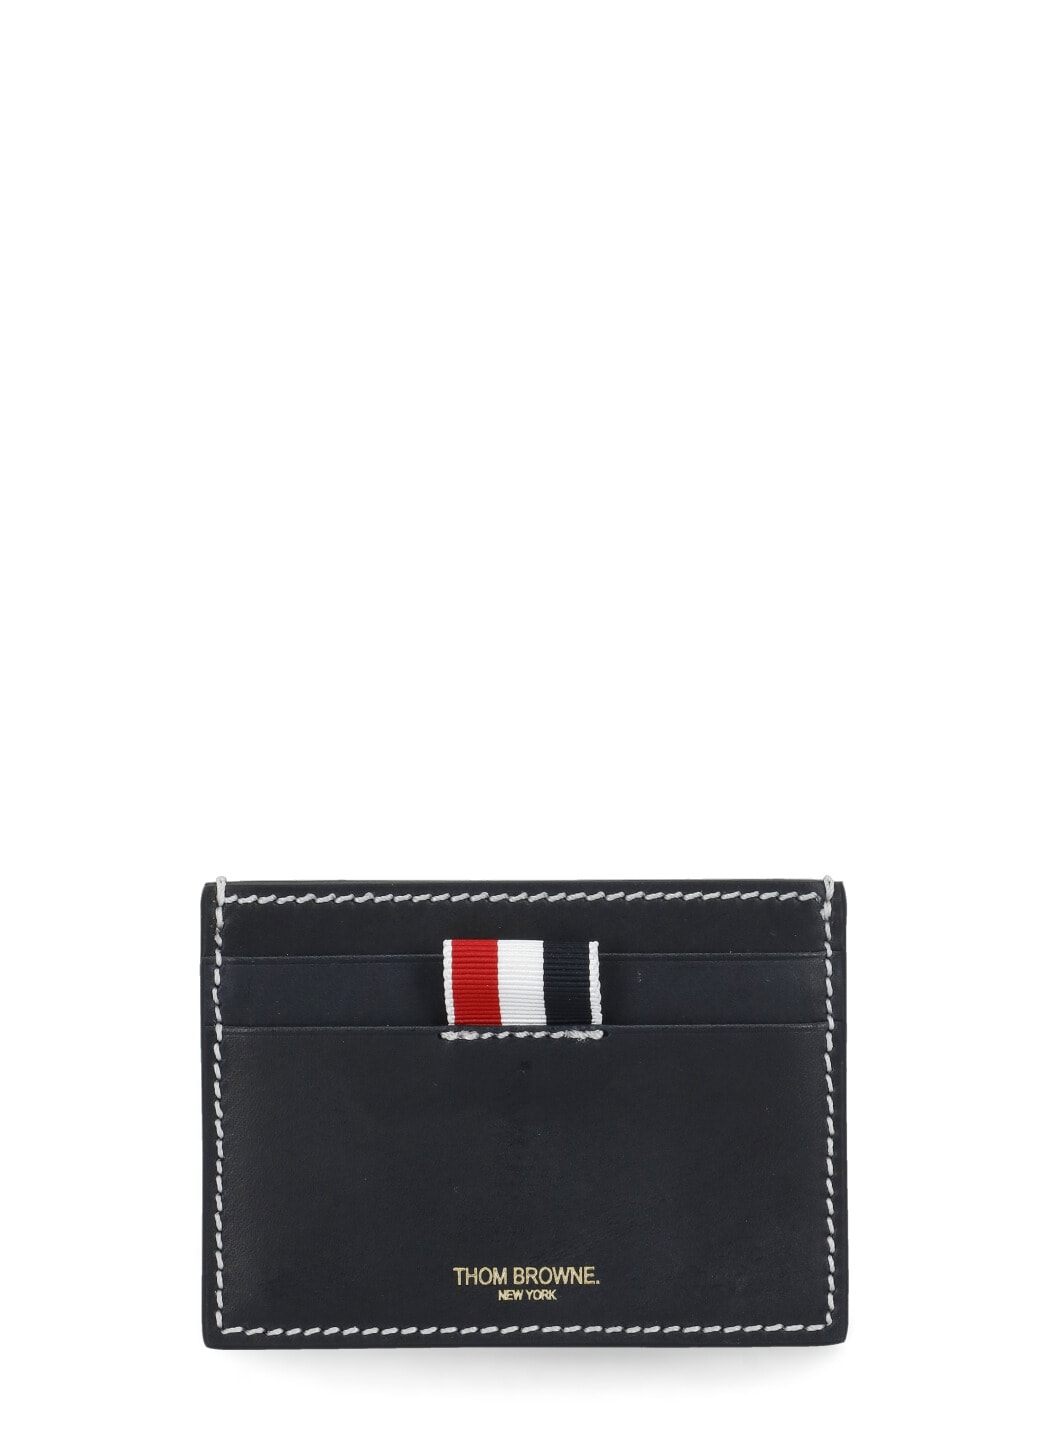 THOM BROWNE LEATHER CARDS HOLDER